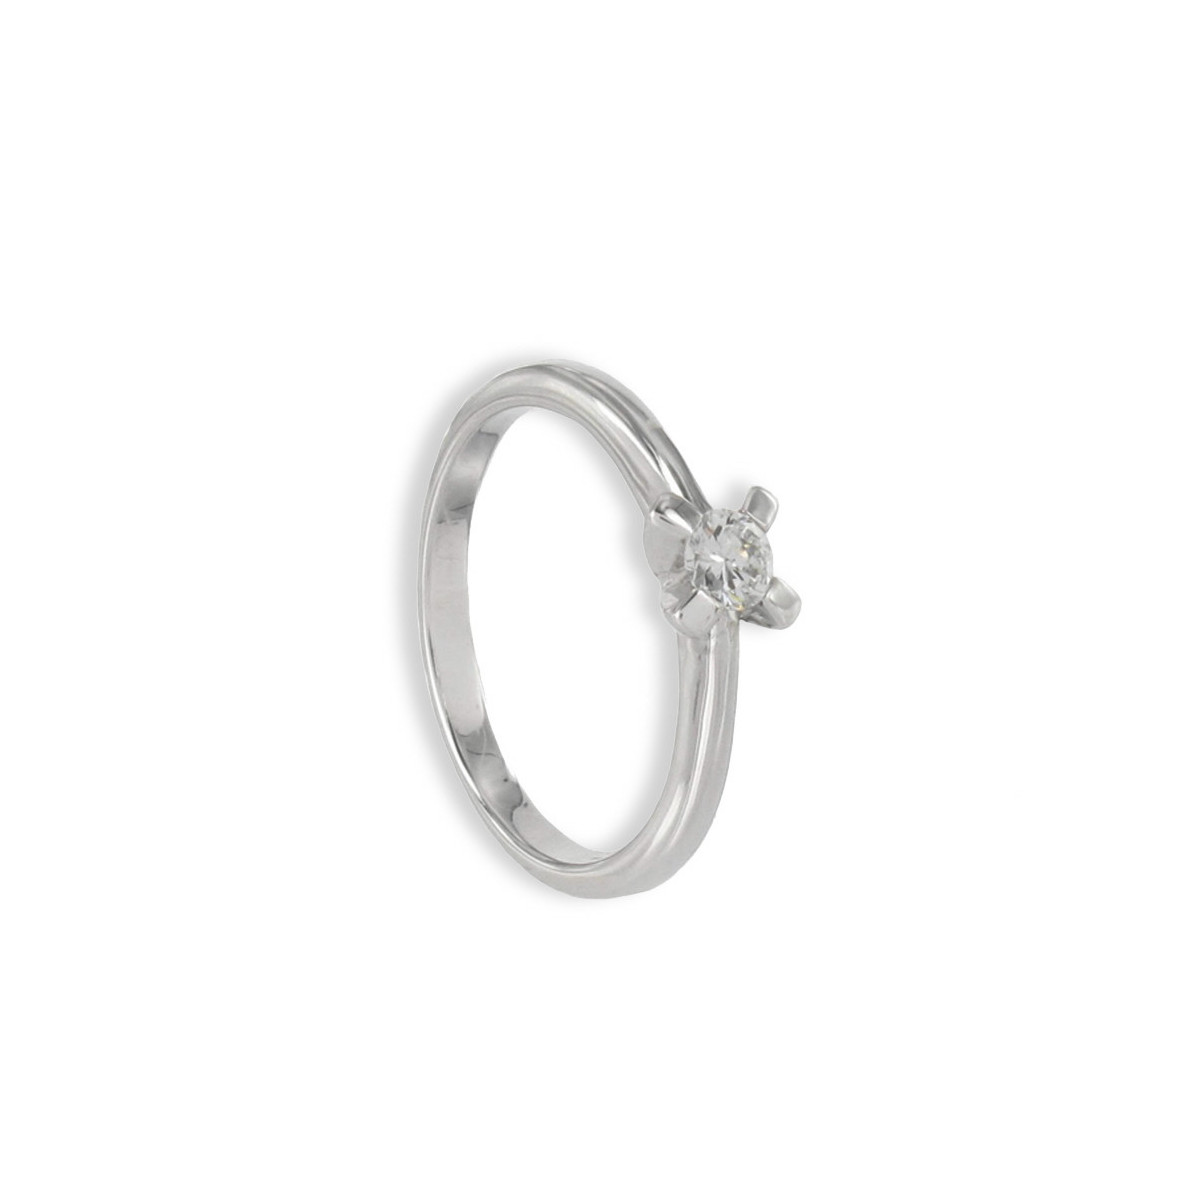 RING WITH SOLITAIRE DIAMOND 0.18 CARAT